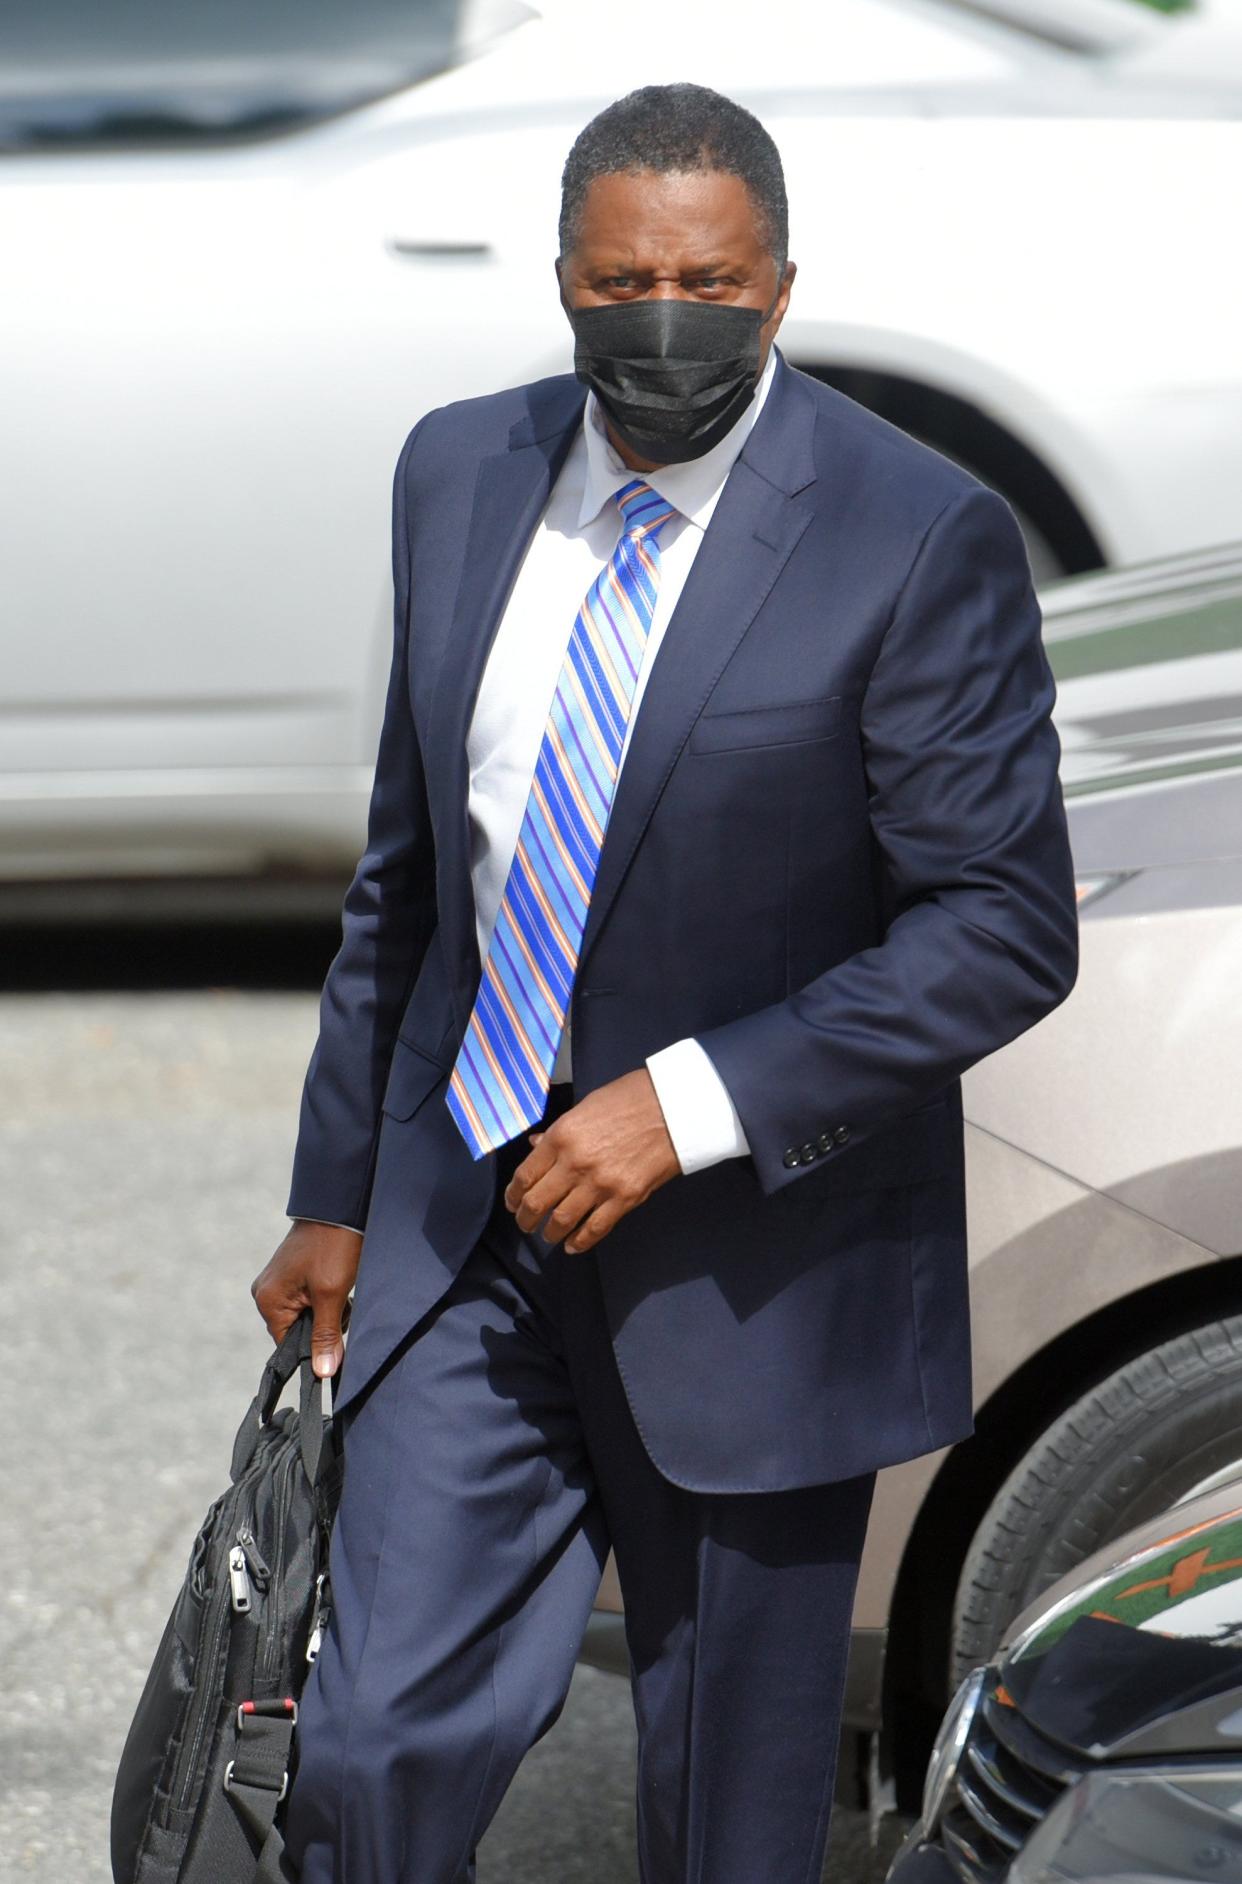 Former Jacksonville City Council member Reggie Brown, shown here before his October 2020 sentencing on fraud charges, is asking a judge to delay the government seizing his house to help pay a $411,000 forfeiture order.